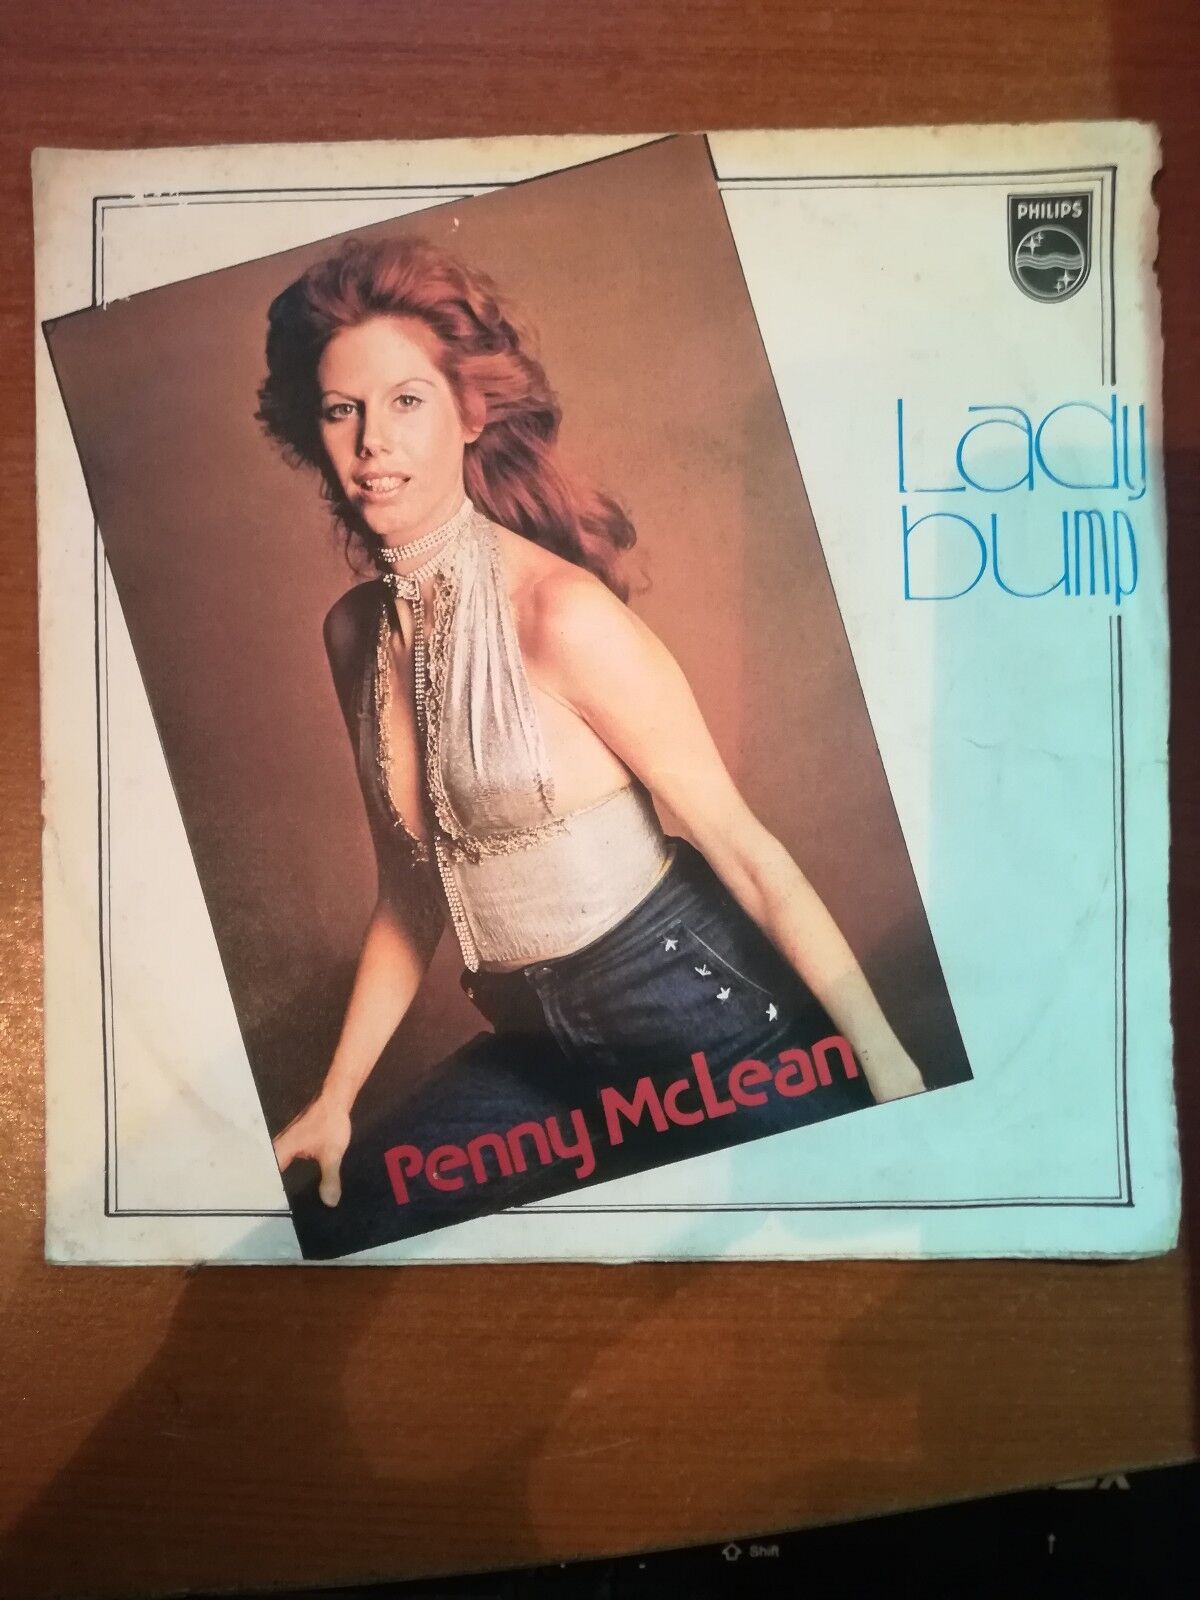 Lady bump - Penny McLean - 1975 - Philips - M